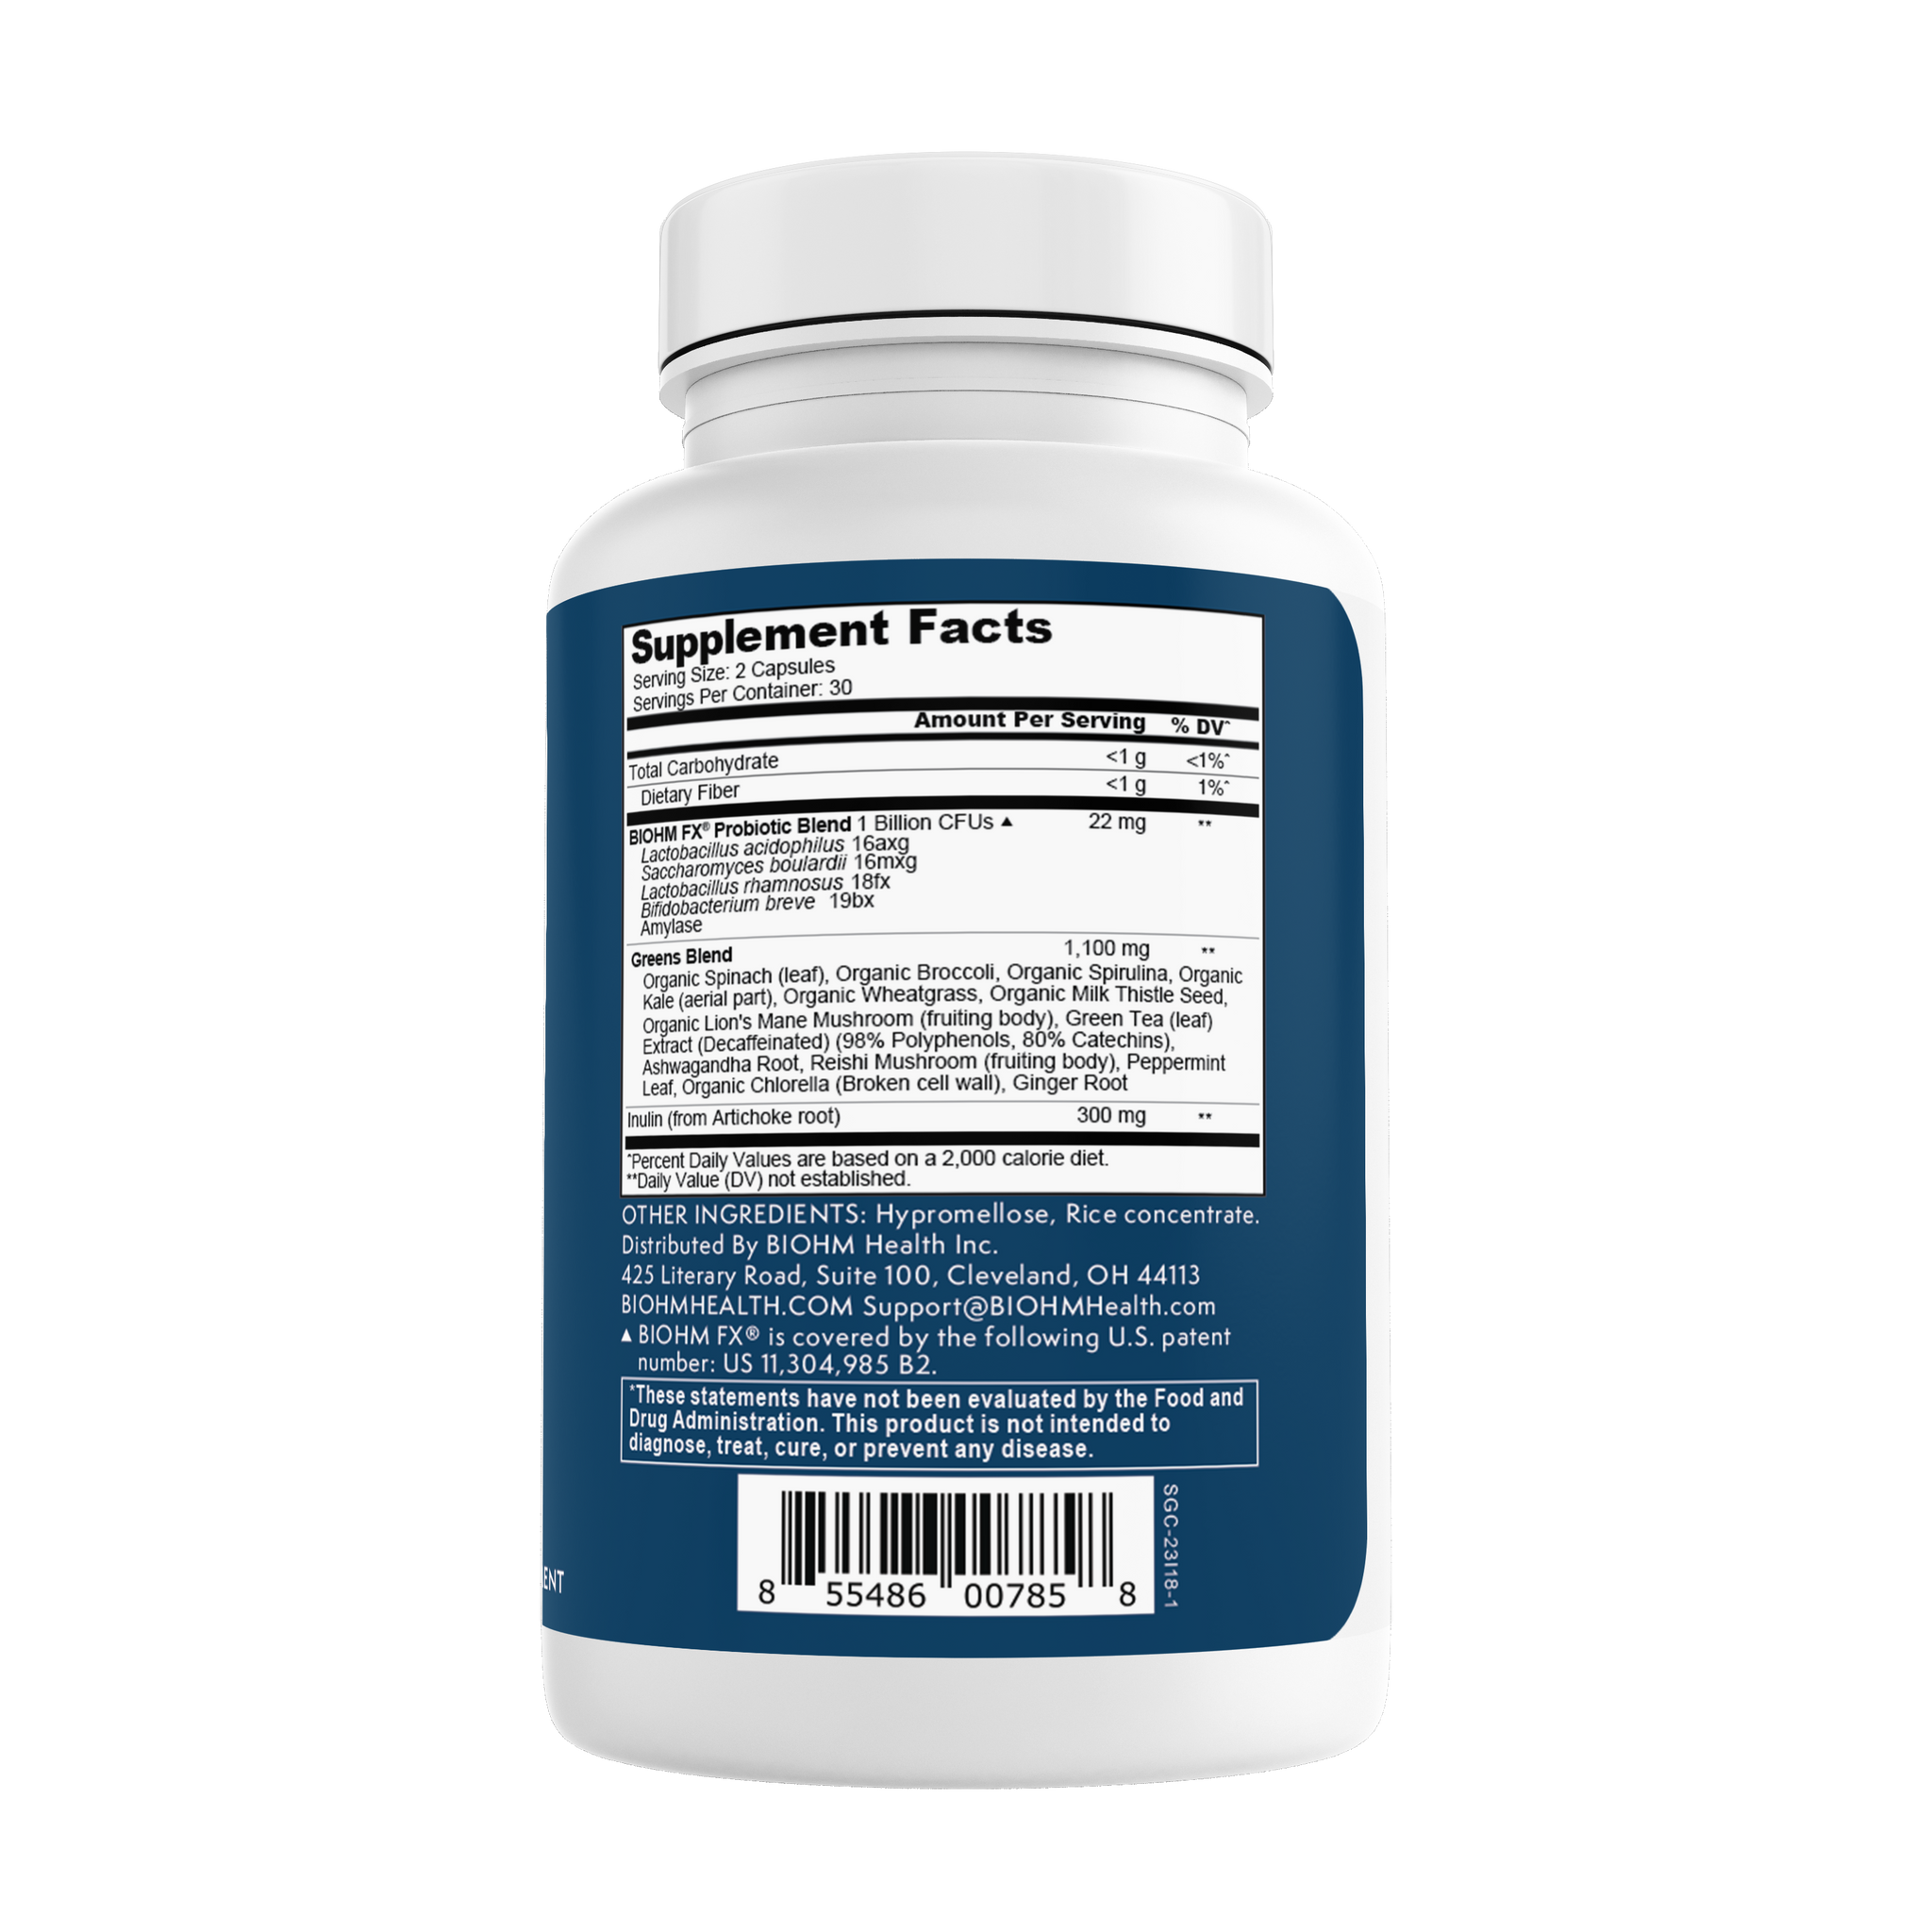 microbiome super greens capsules supplement facts